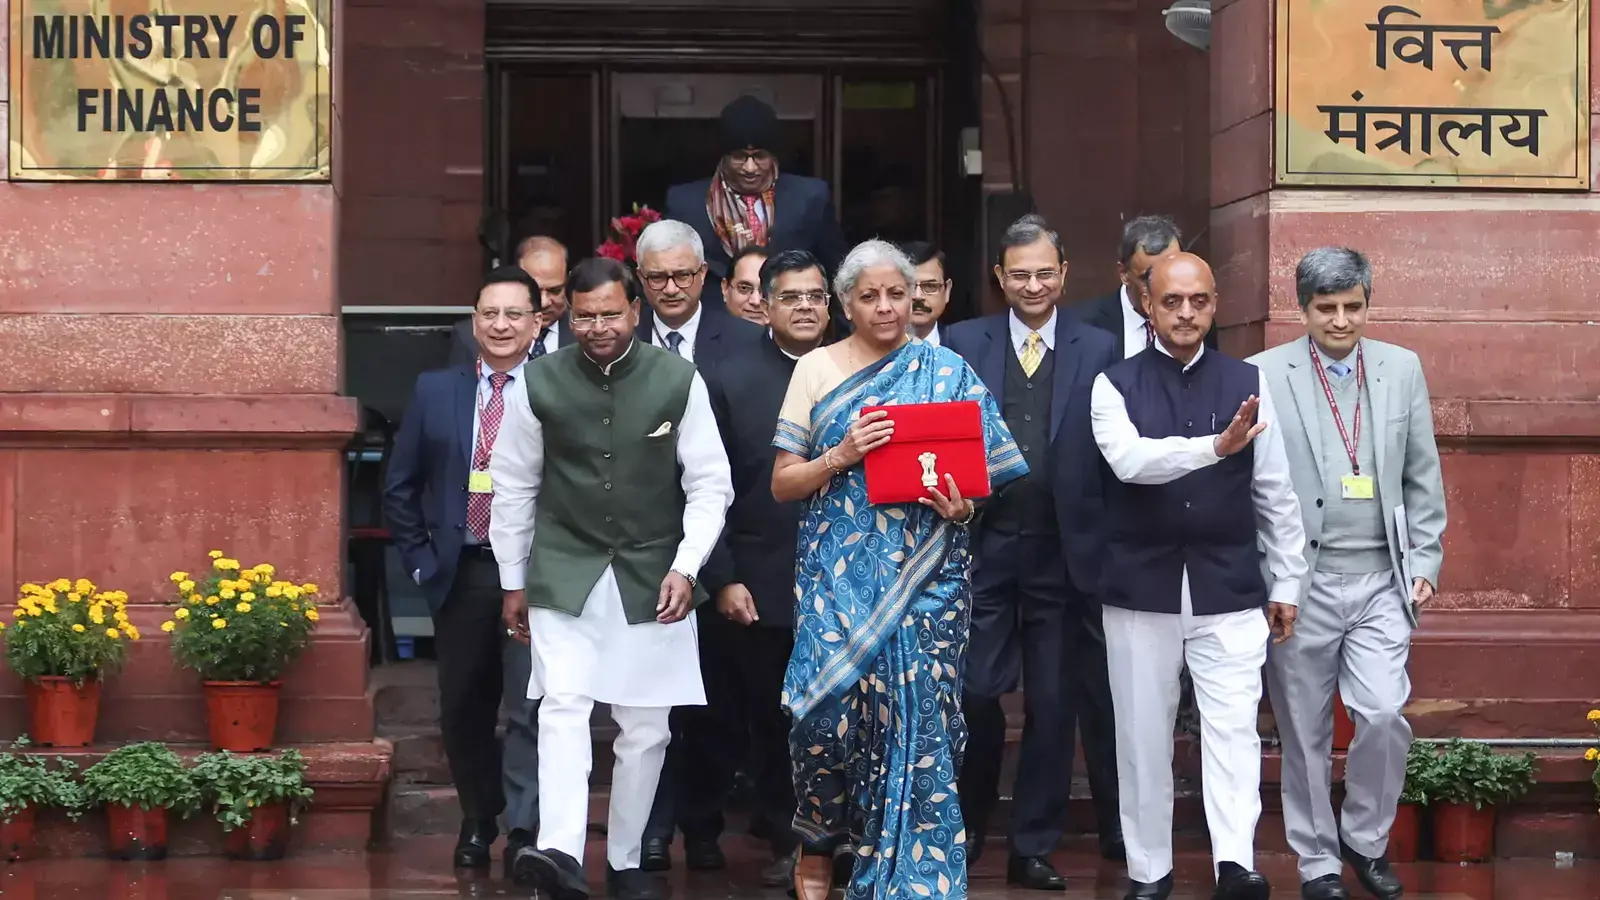 India's Finance Minister Nirmala Sitaraman presents her government's last budget before the country enters its general elections this summer